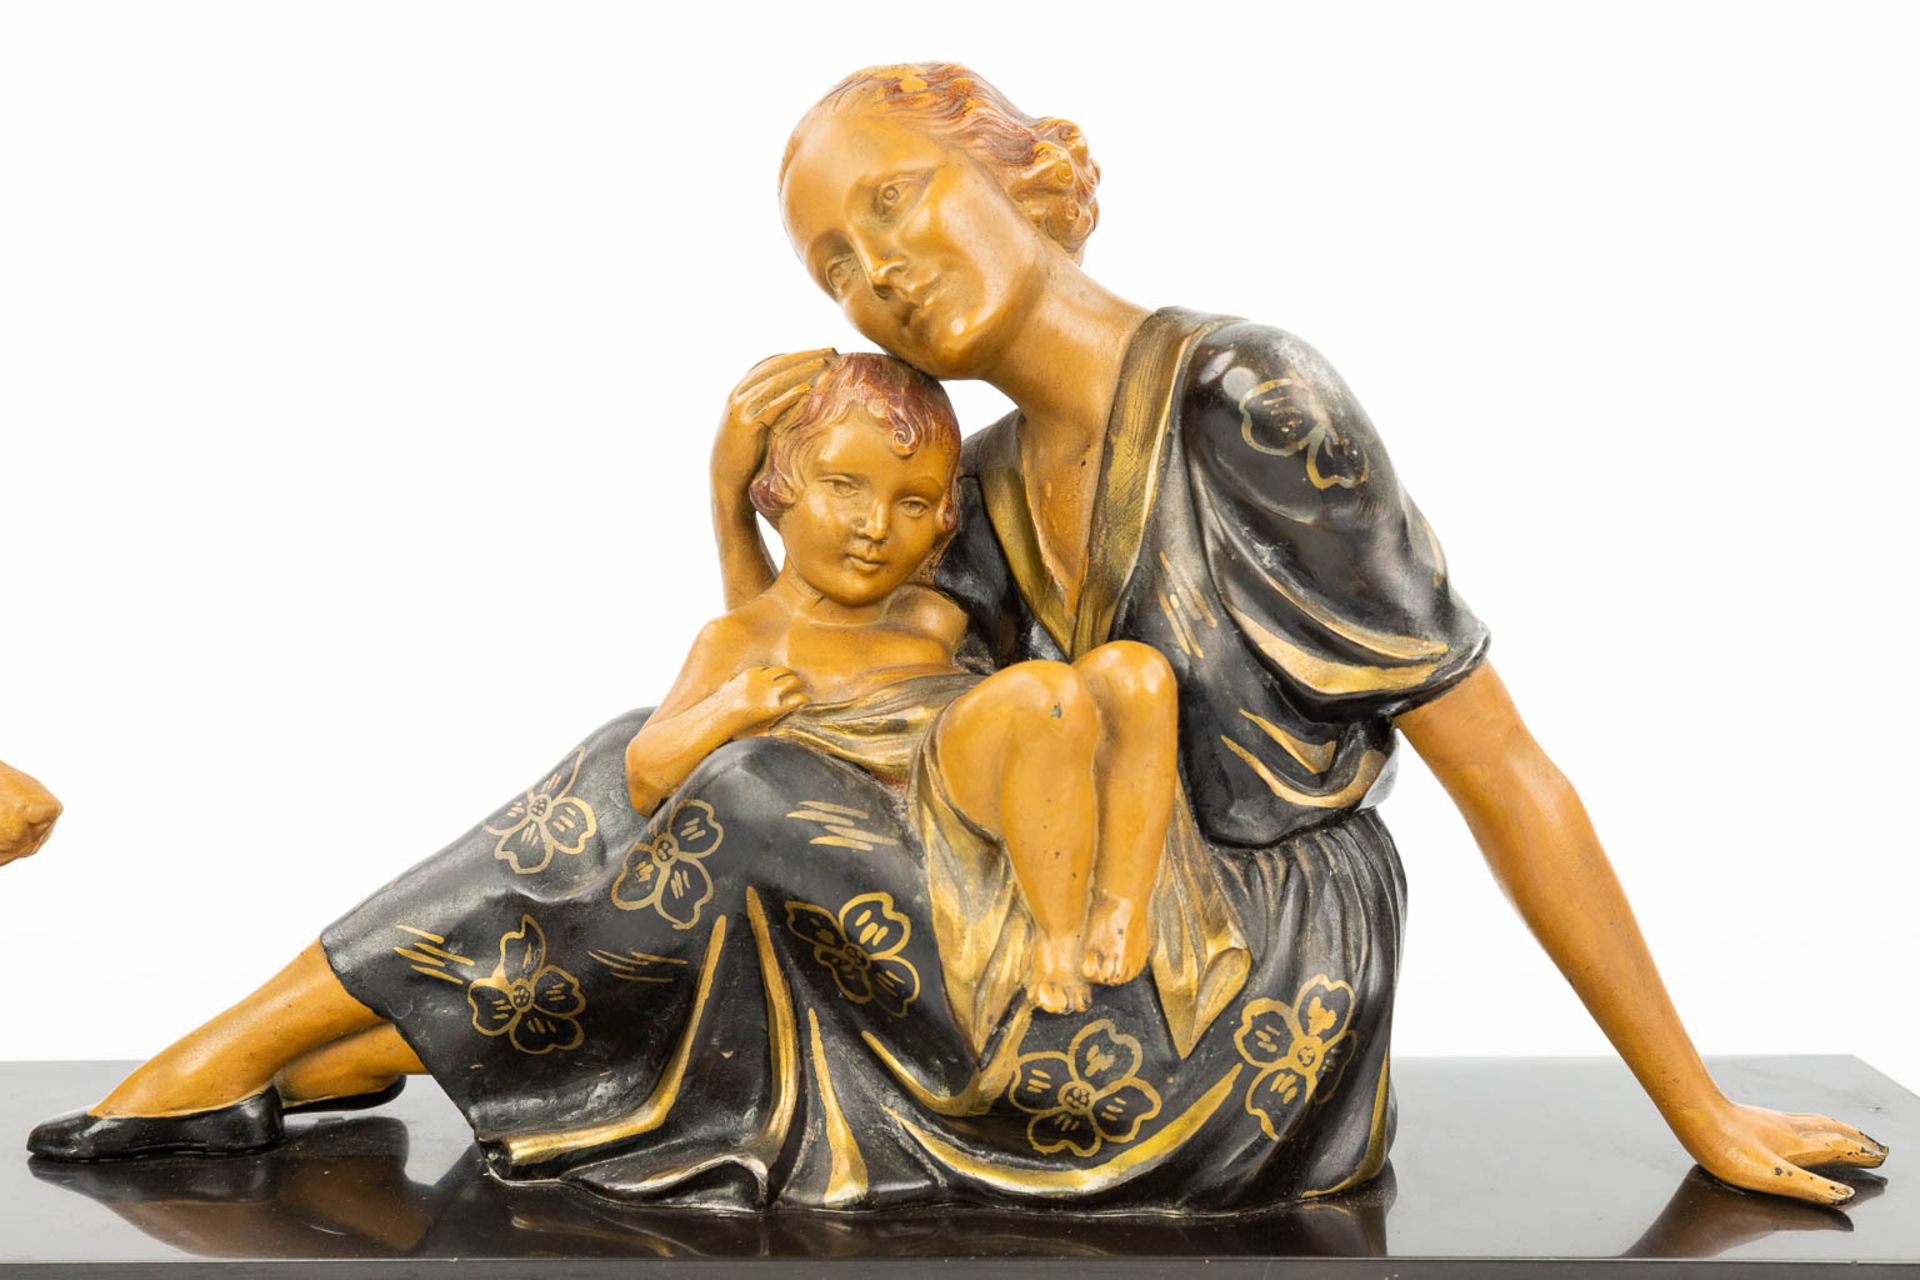 An art deco style statue of a woman with child and her dog, made of spelter and mounted on a marble - Image 8 of 12